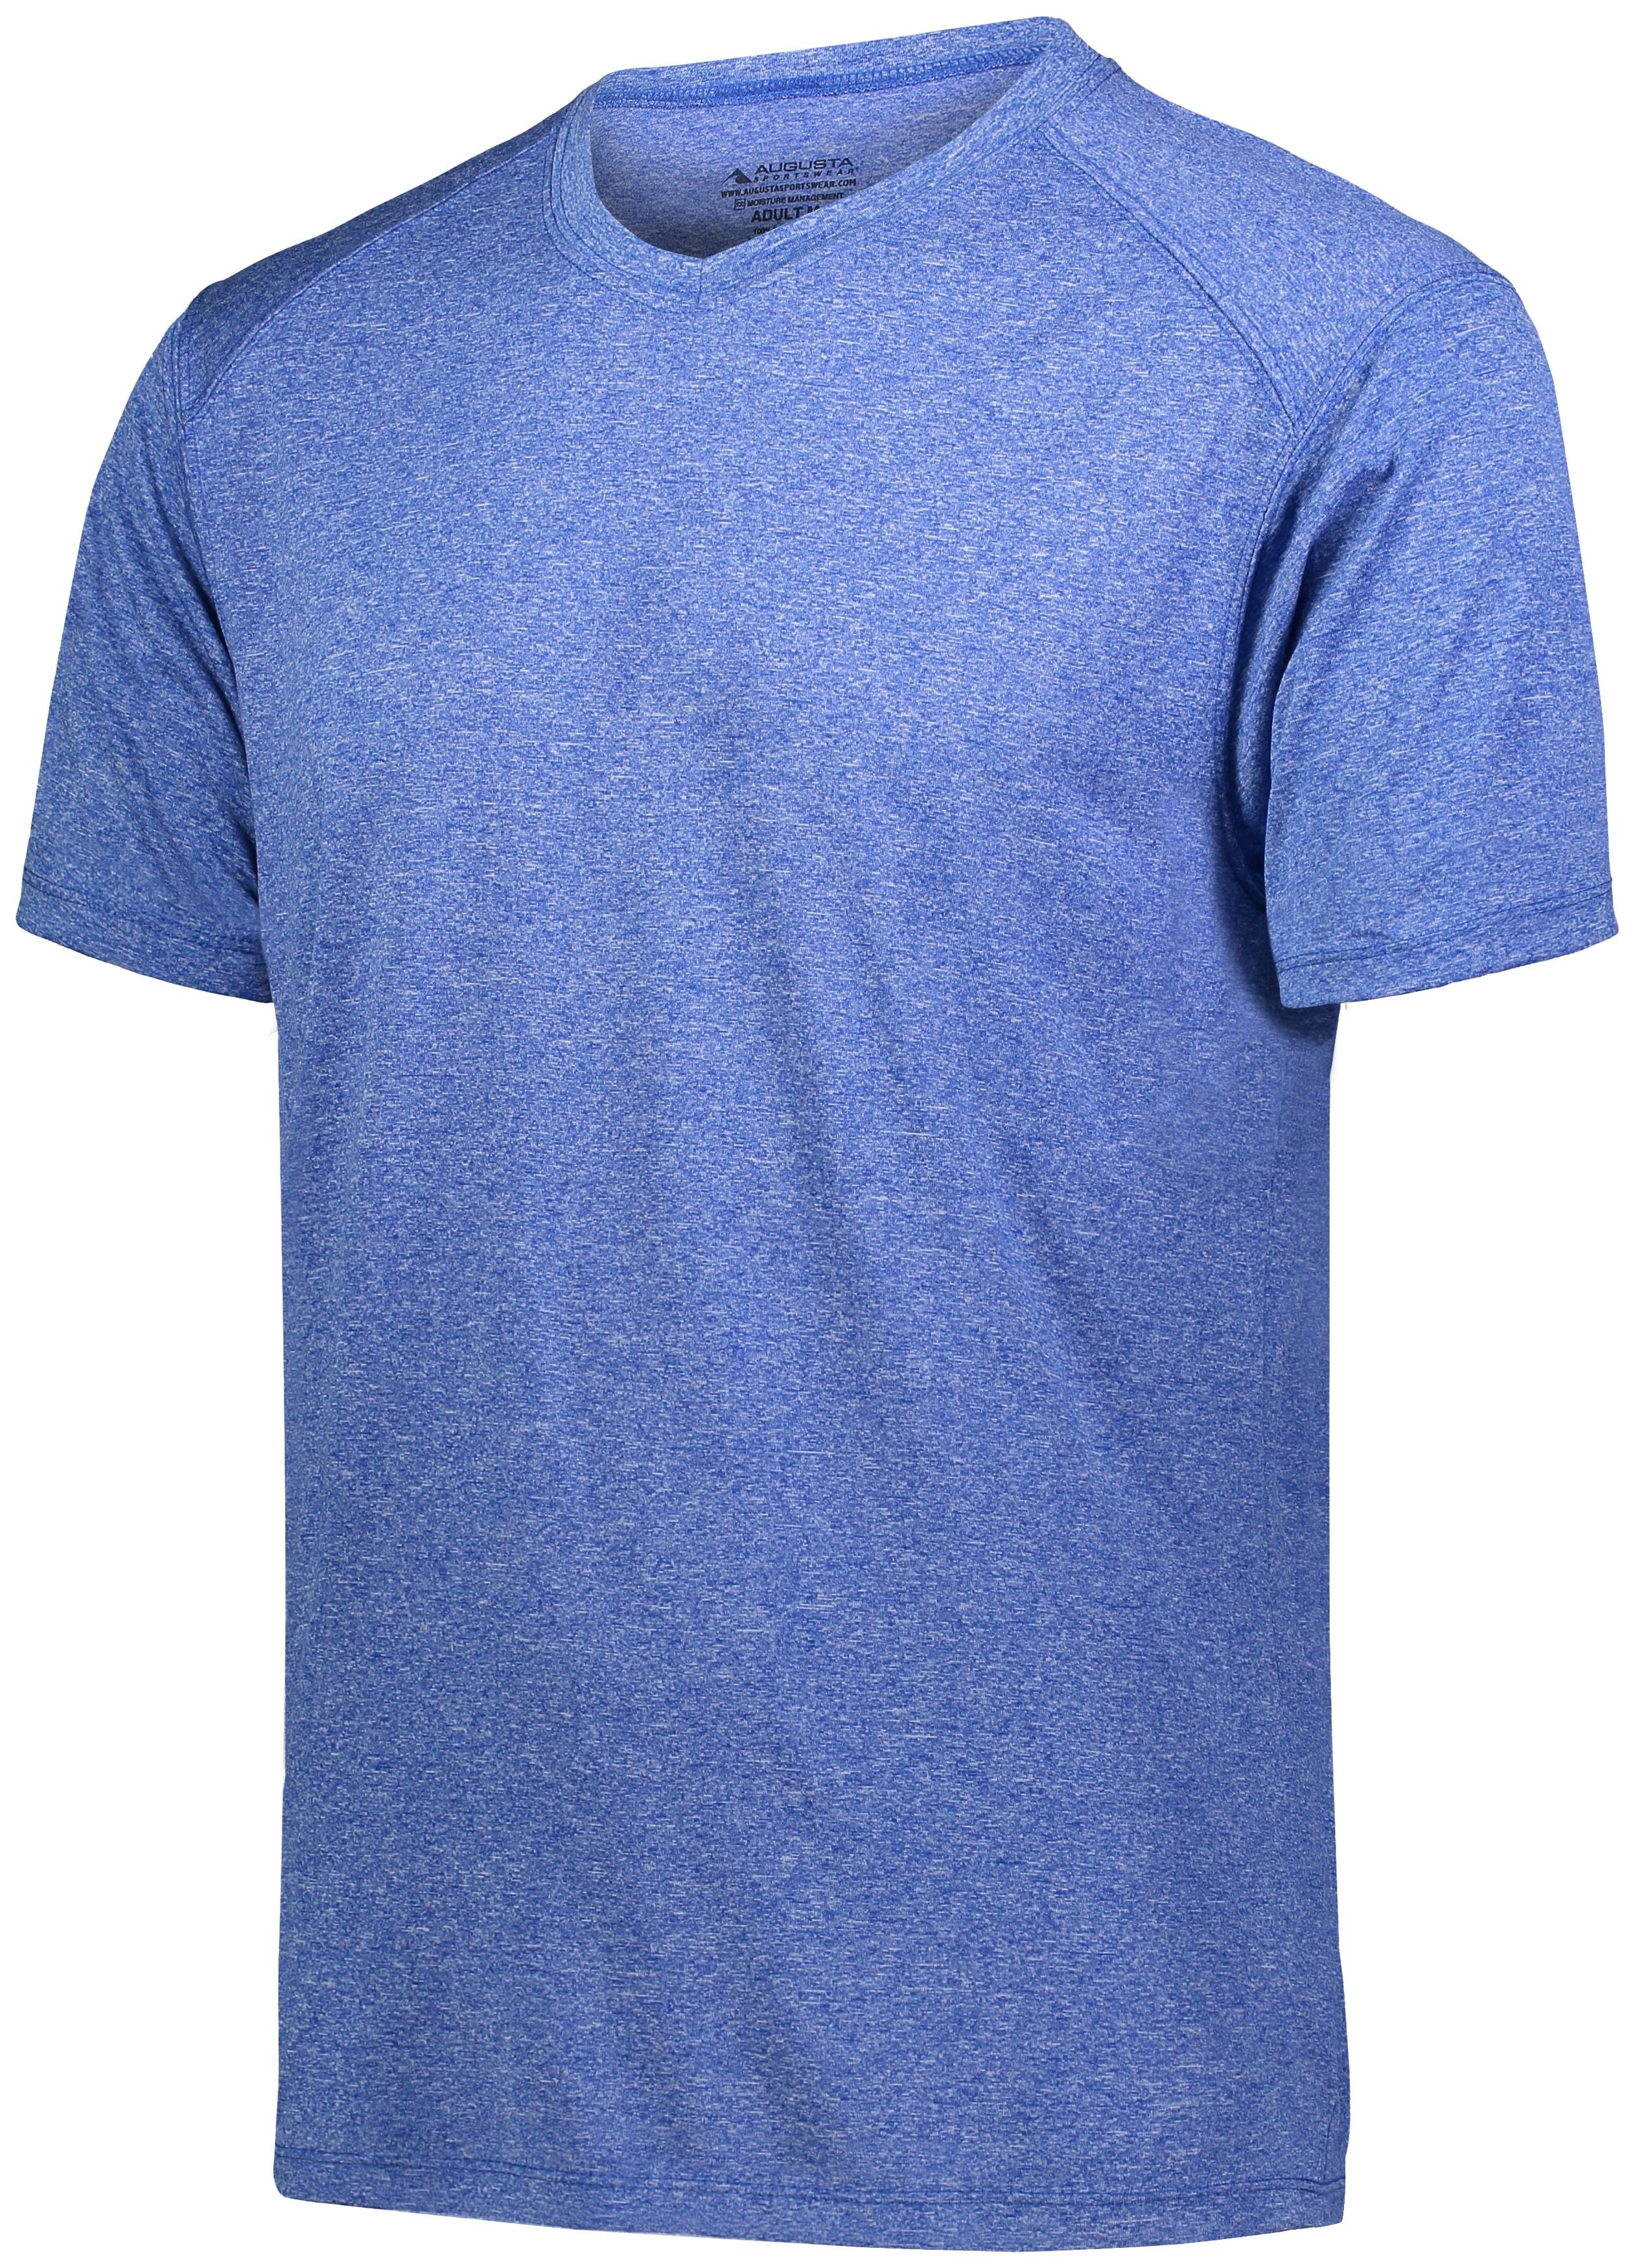 Augusta Sportswear Kinergy Training Tee in Royal Heather  -Part of the Adult, Adult-Tee-Shirt, T-Shirts, Augusta-Products, Shirts product lines at KanaleyCreations.com